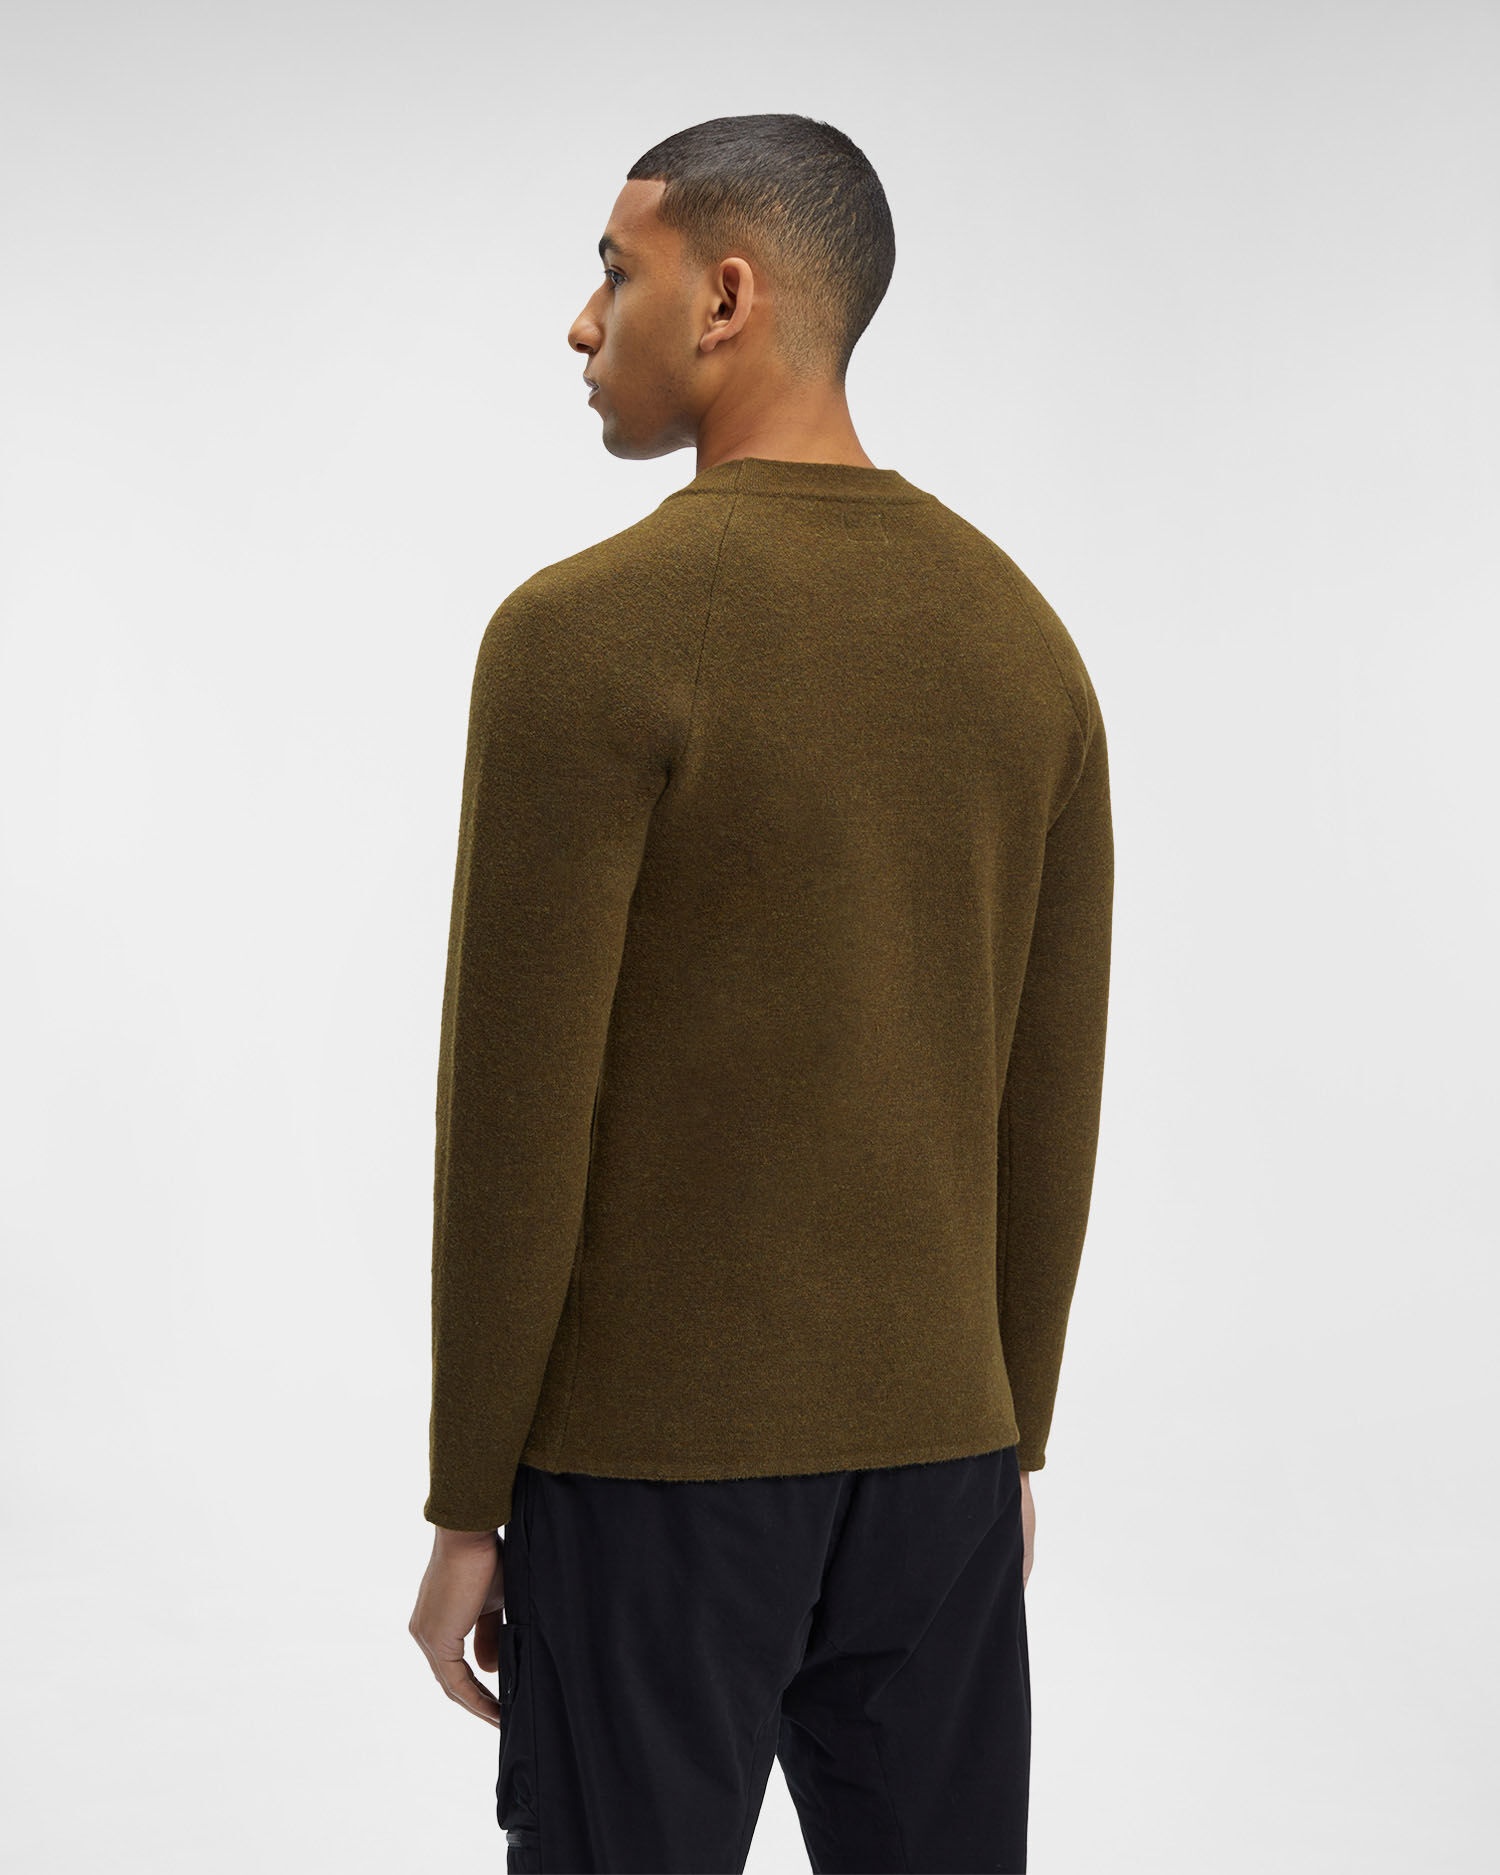 Reversible Double-Knit Crew Neck Sweater